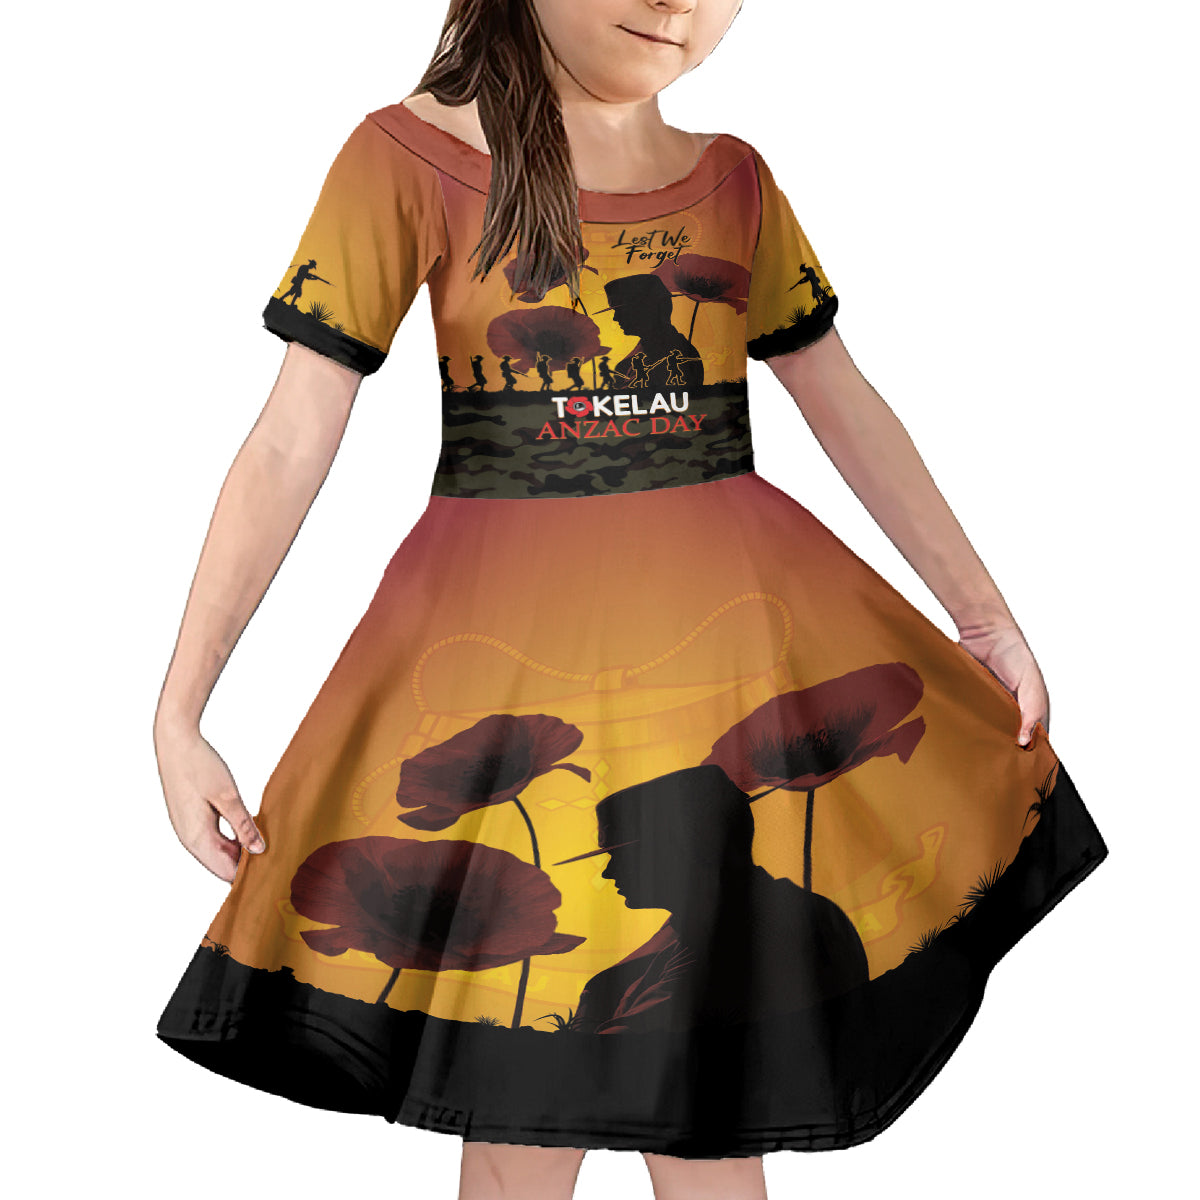 Tokelau ANZAC Day Kid Short Sleeve Dress Camouflage With Poppies Lest We Forget LT14 KID Yellow - Polynesian Pride